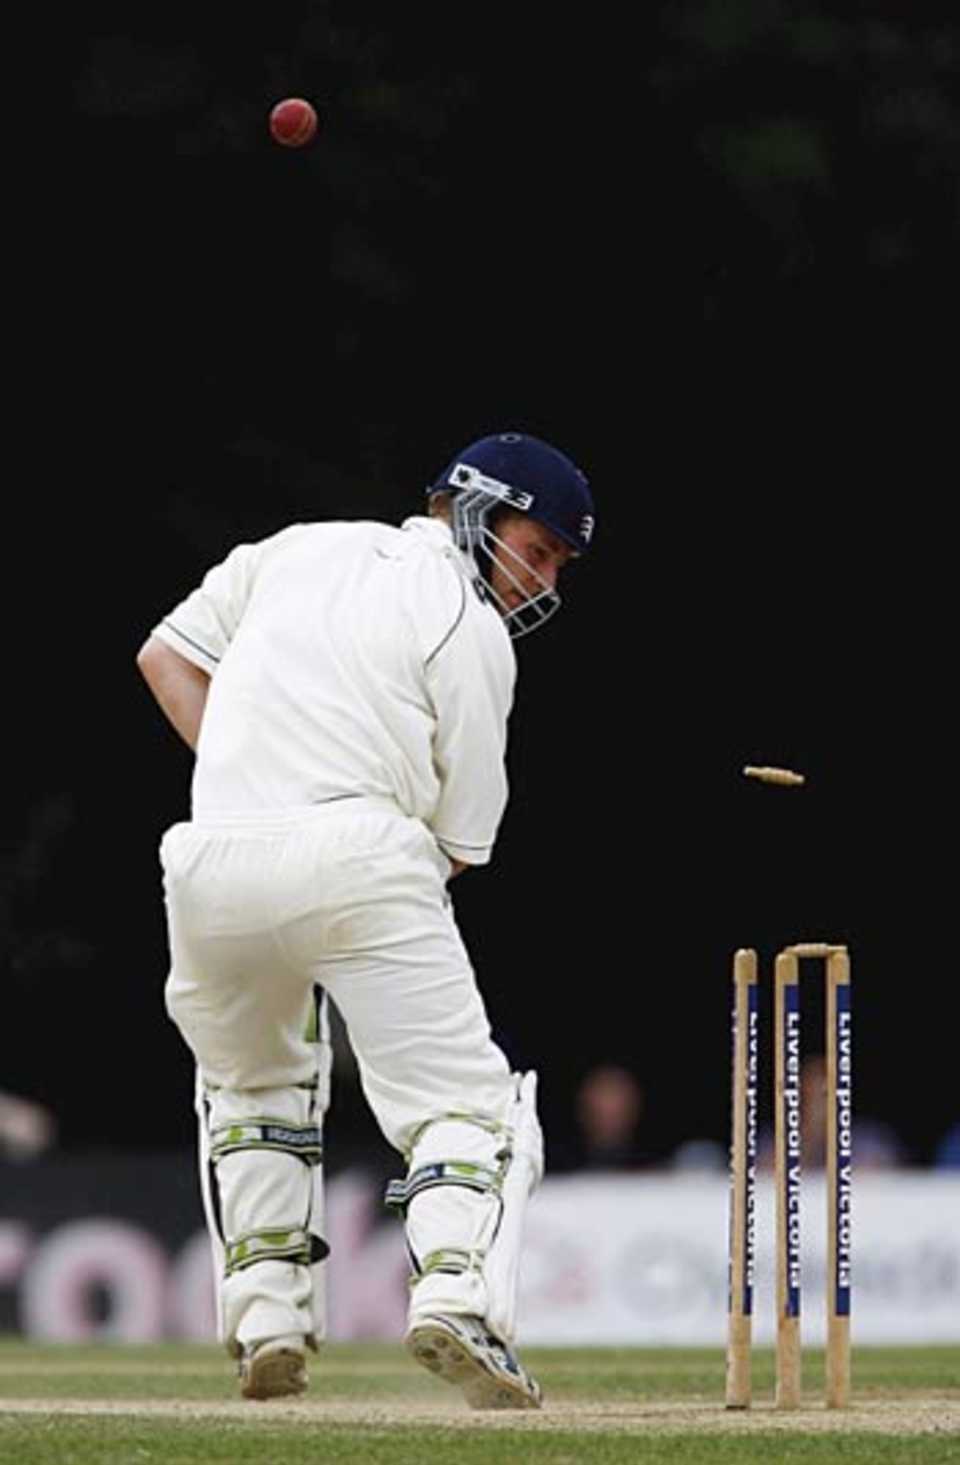 Jamie Dalrymple is bowled by Yasir Arafat on the final day, Middlesex v Sussex, Southgate, County Championship, July 22, 2006